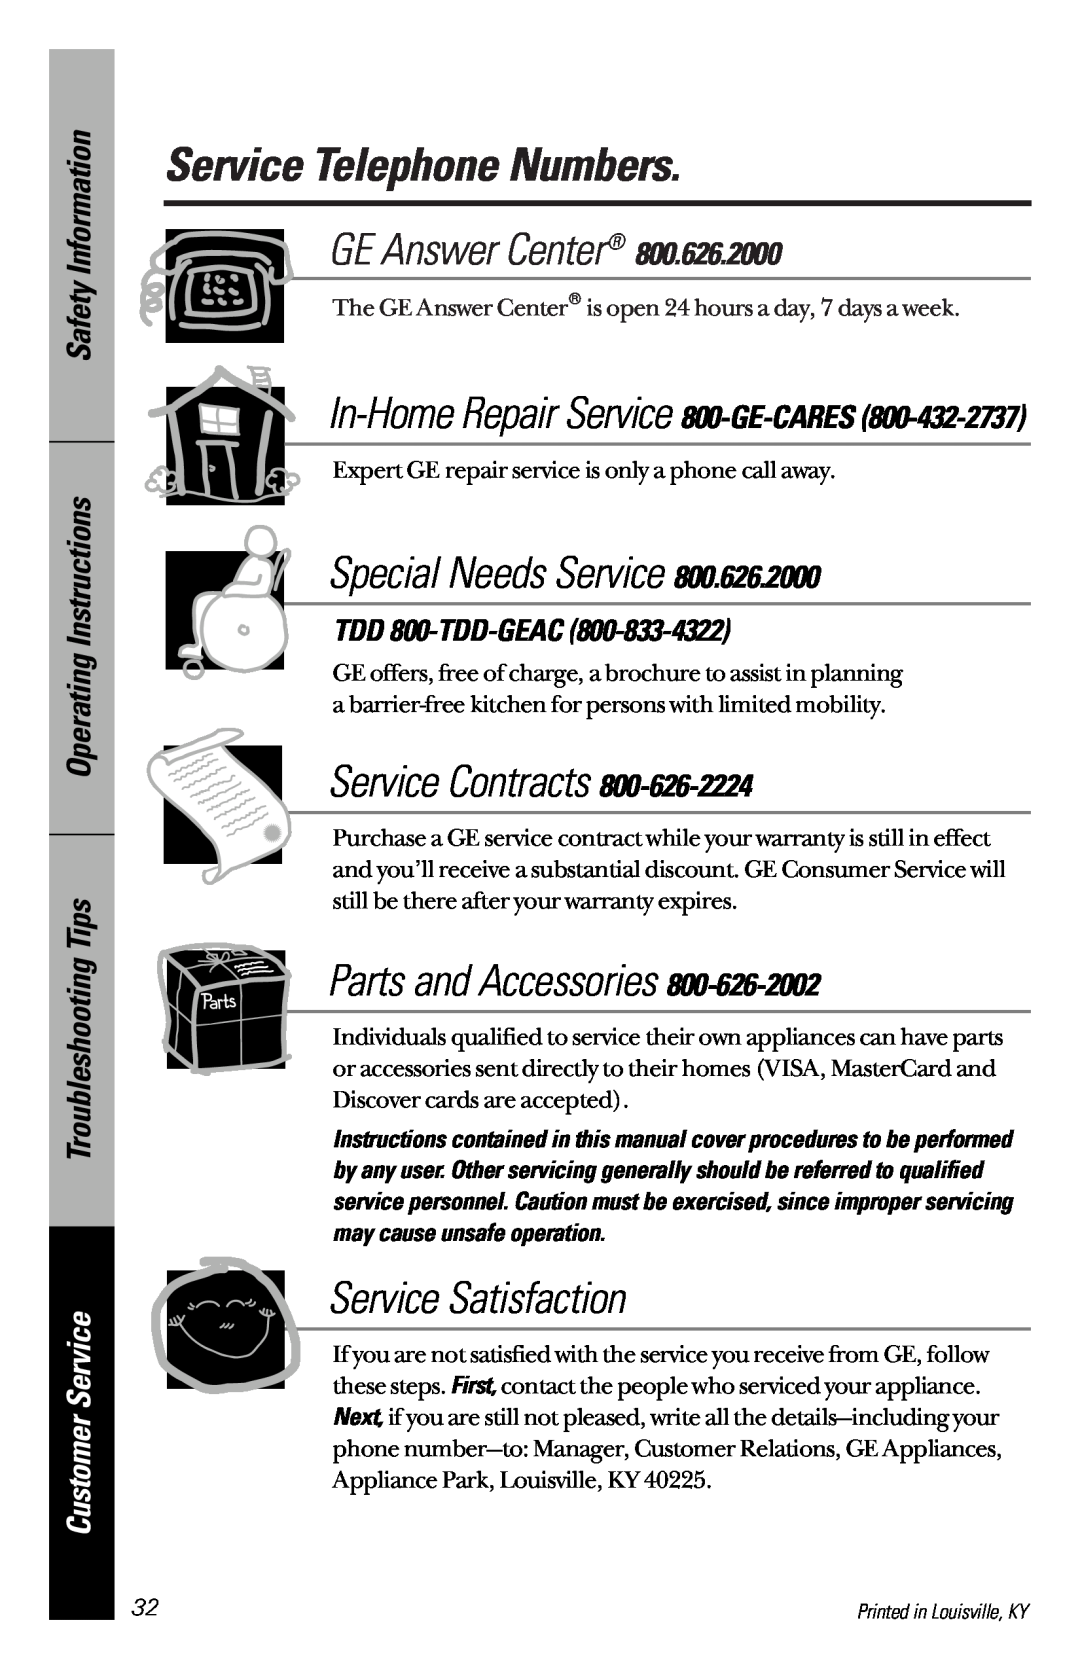 GE GSD5114 Service Telephone Numbers, Safety Information Operating Instructions Troubleshooting Tips, Customer Service 